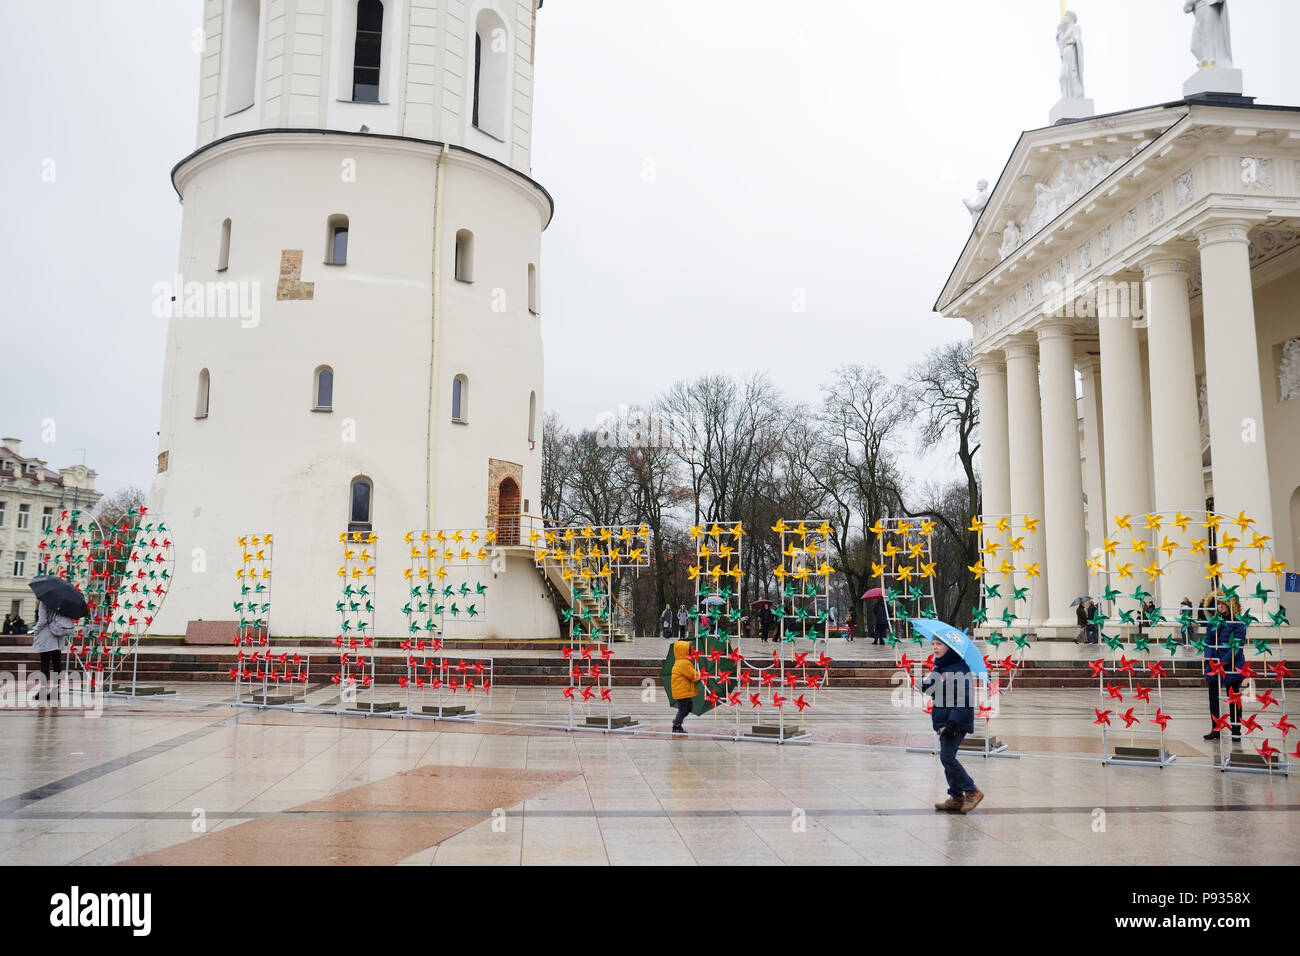 VILNIUS, LITHUANIA - MARCH 11, 2016: Thousands of people taking part in a festive events as Lithuania marked the 26th anniversary of its independence  Stock Photo